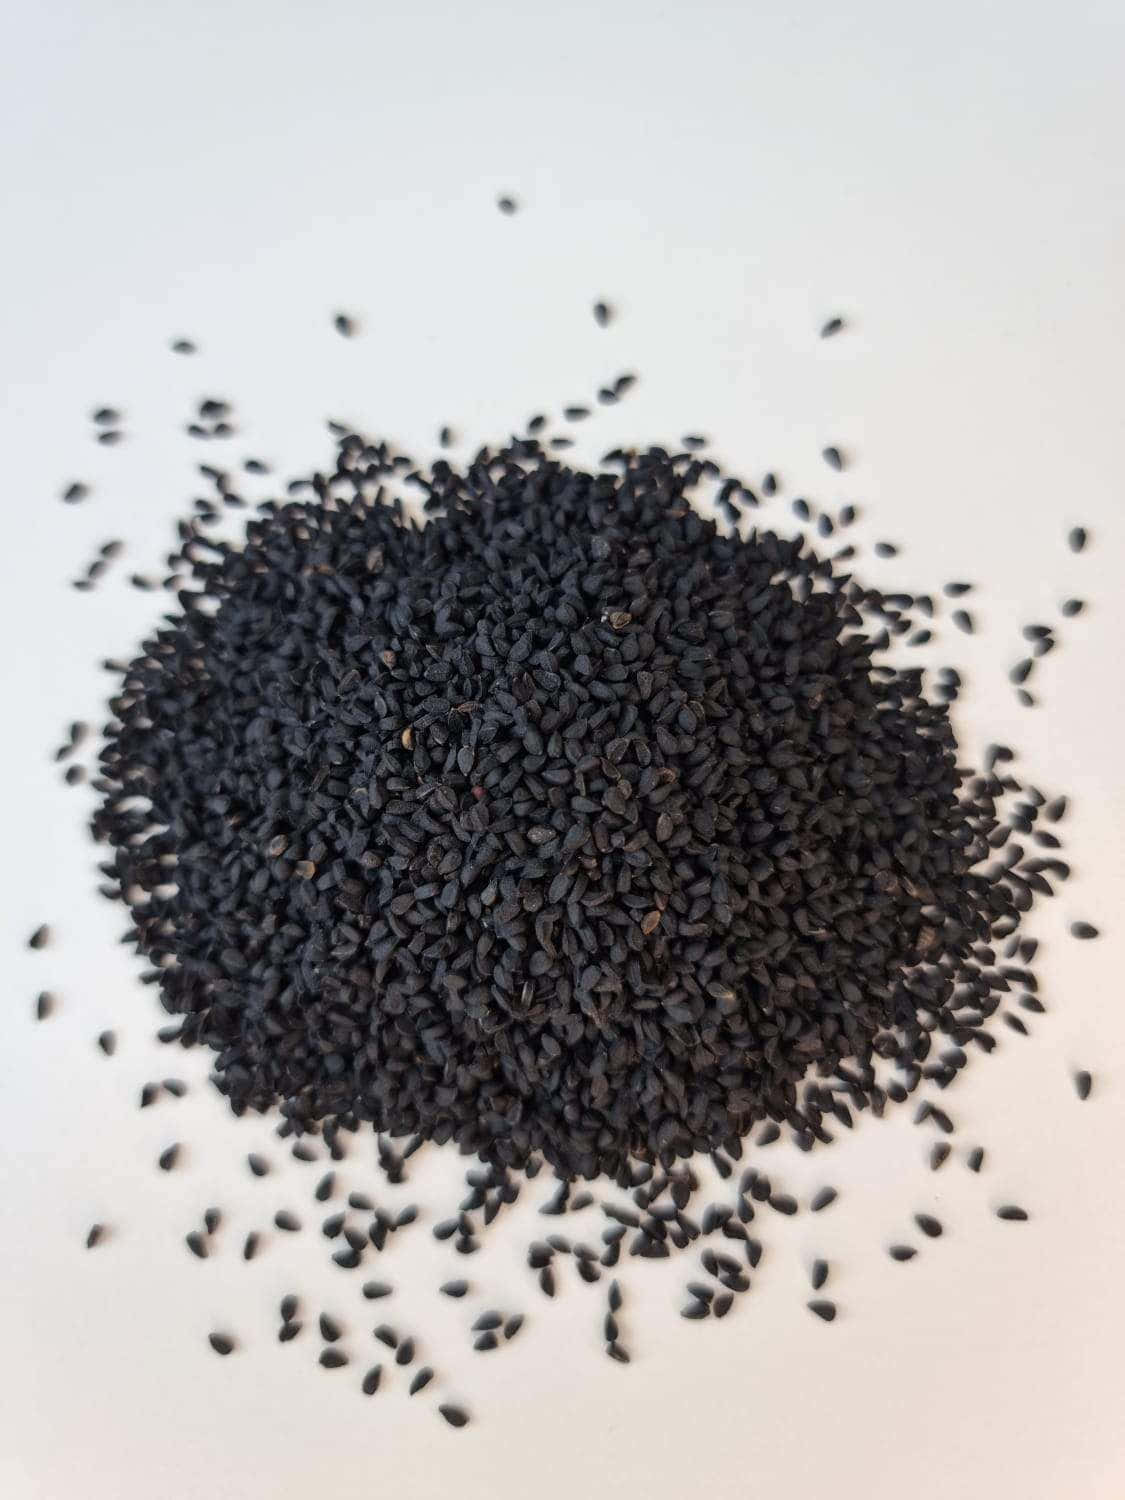 Healing and Flavorful - Try Black Cumin Today Wallpaper